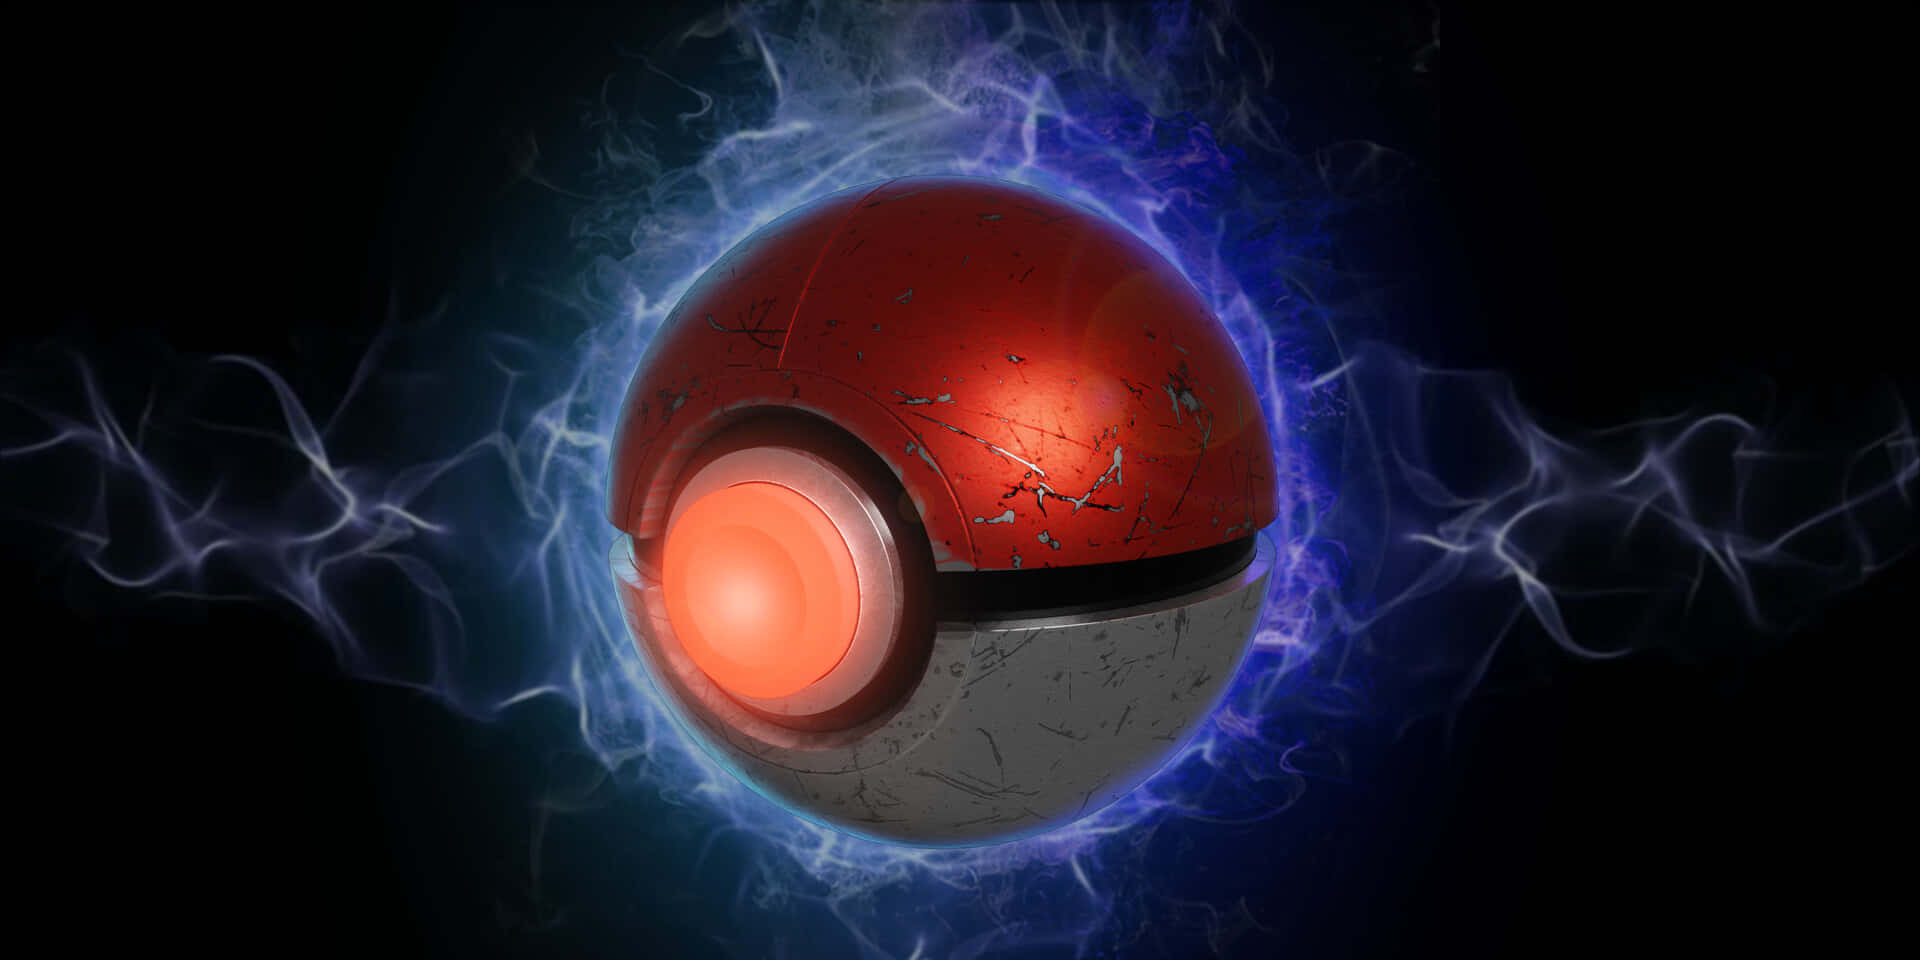 Pokeball - The Gateway to a World Full of Adventure